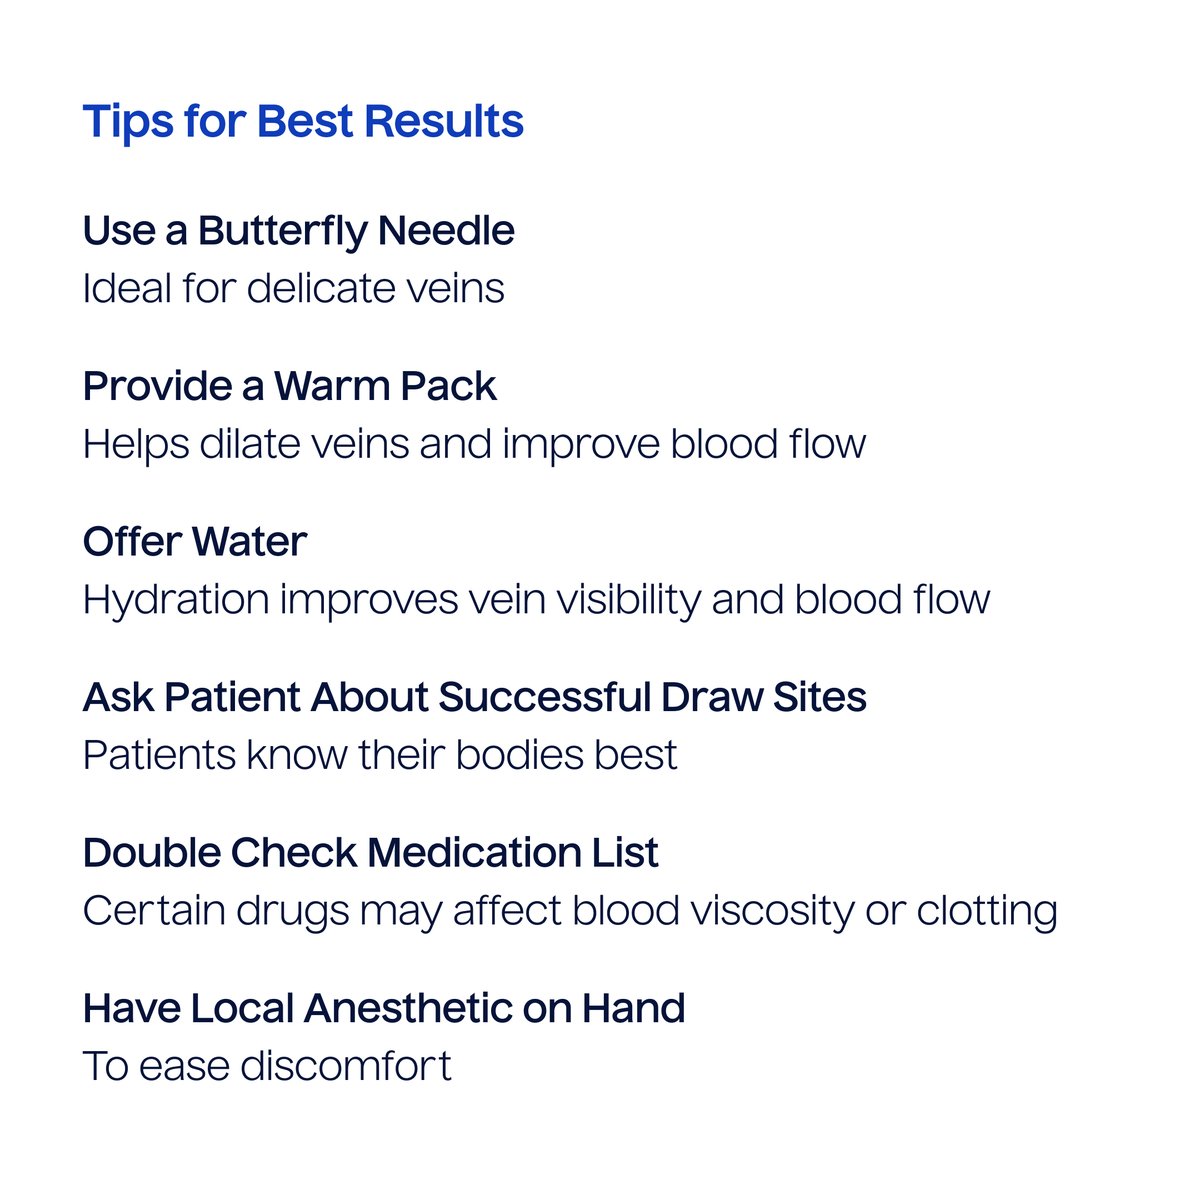 Ever heard of scleroderma? 🤔 We're giving you the low-down on this condition, along with all the tips for a successful draw! 💪 

#phlebotomy #phlebotomist #phlebotomylife #healthcarehero #medicalcareer #intelviotrained